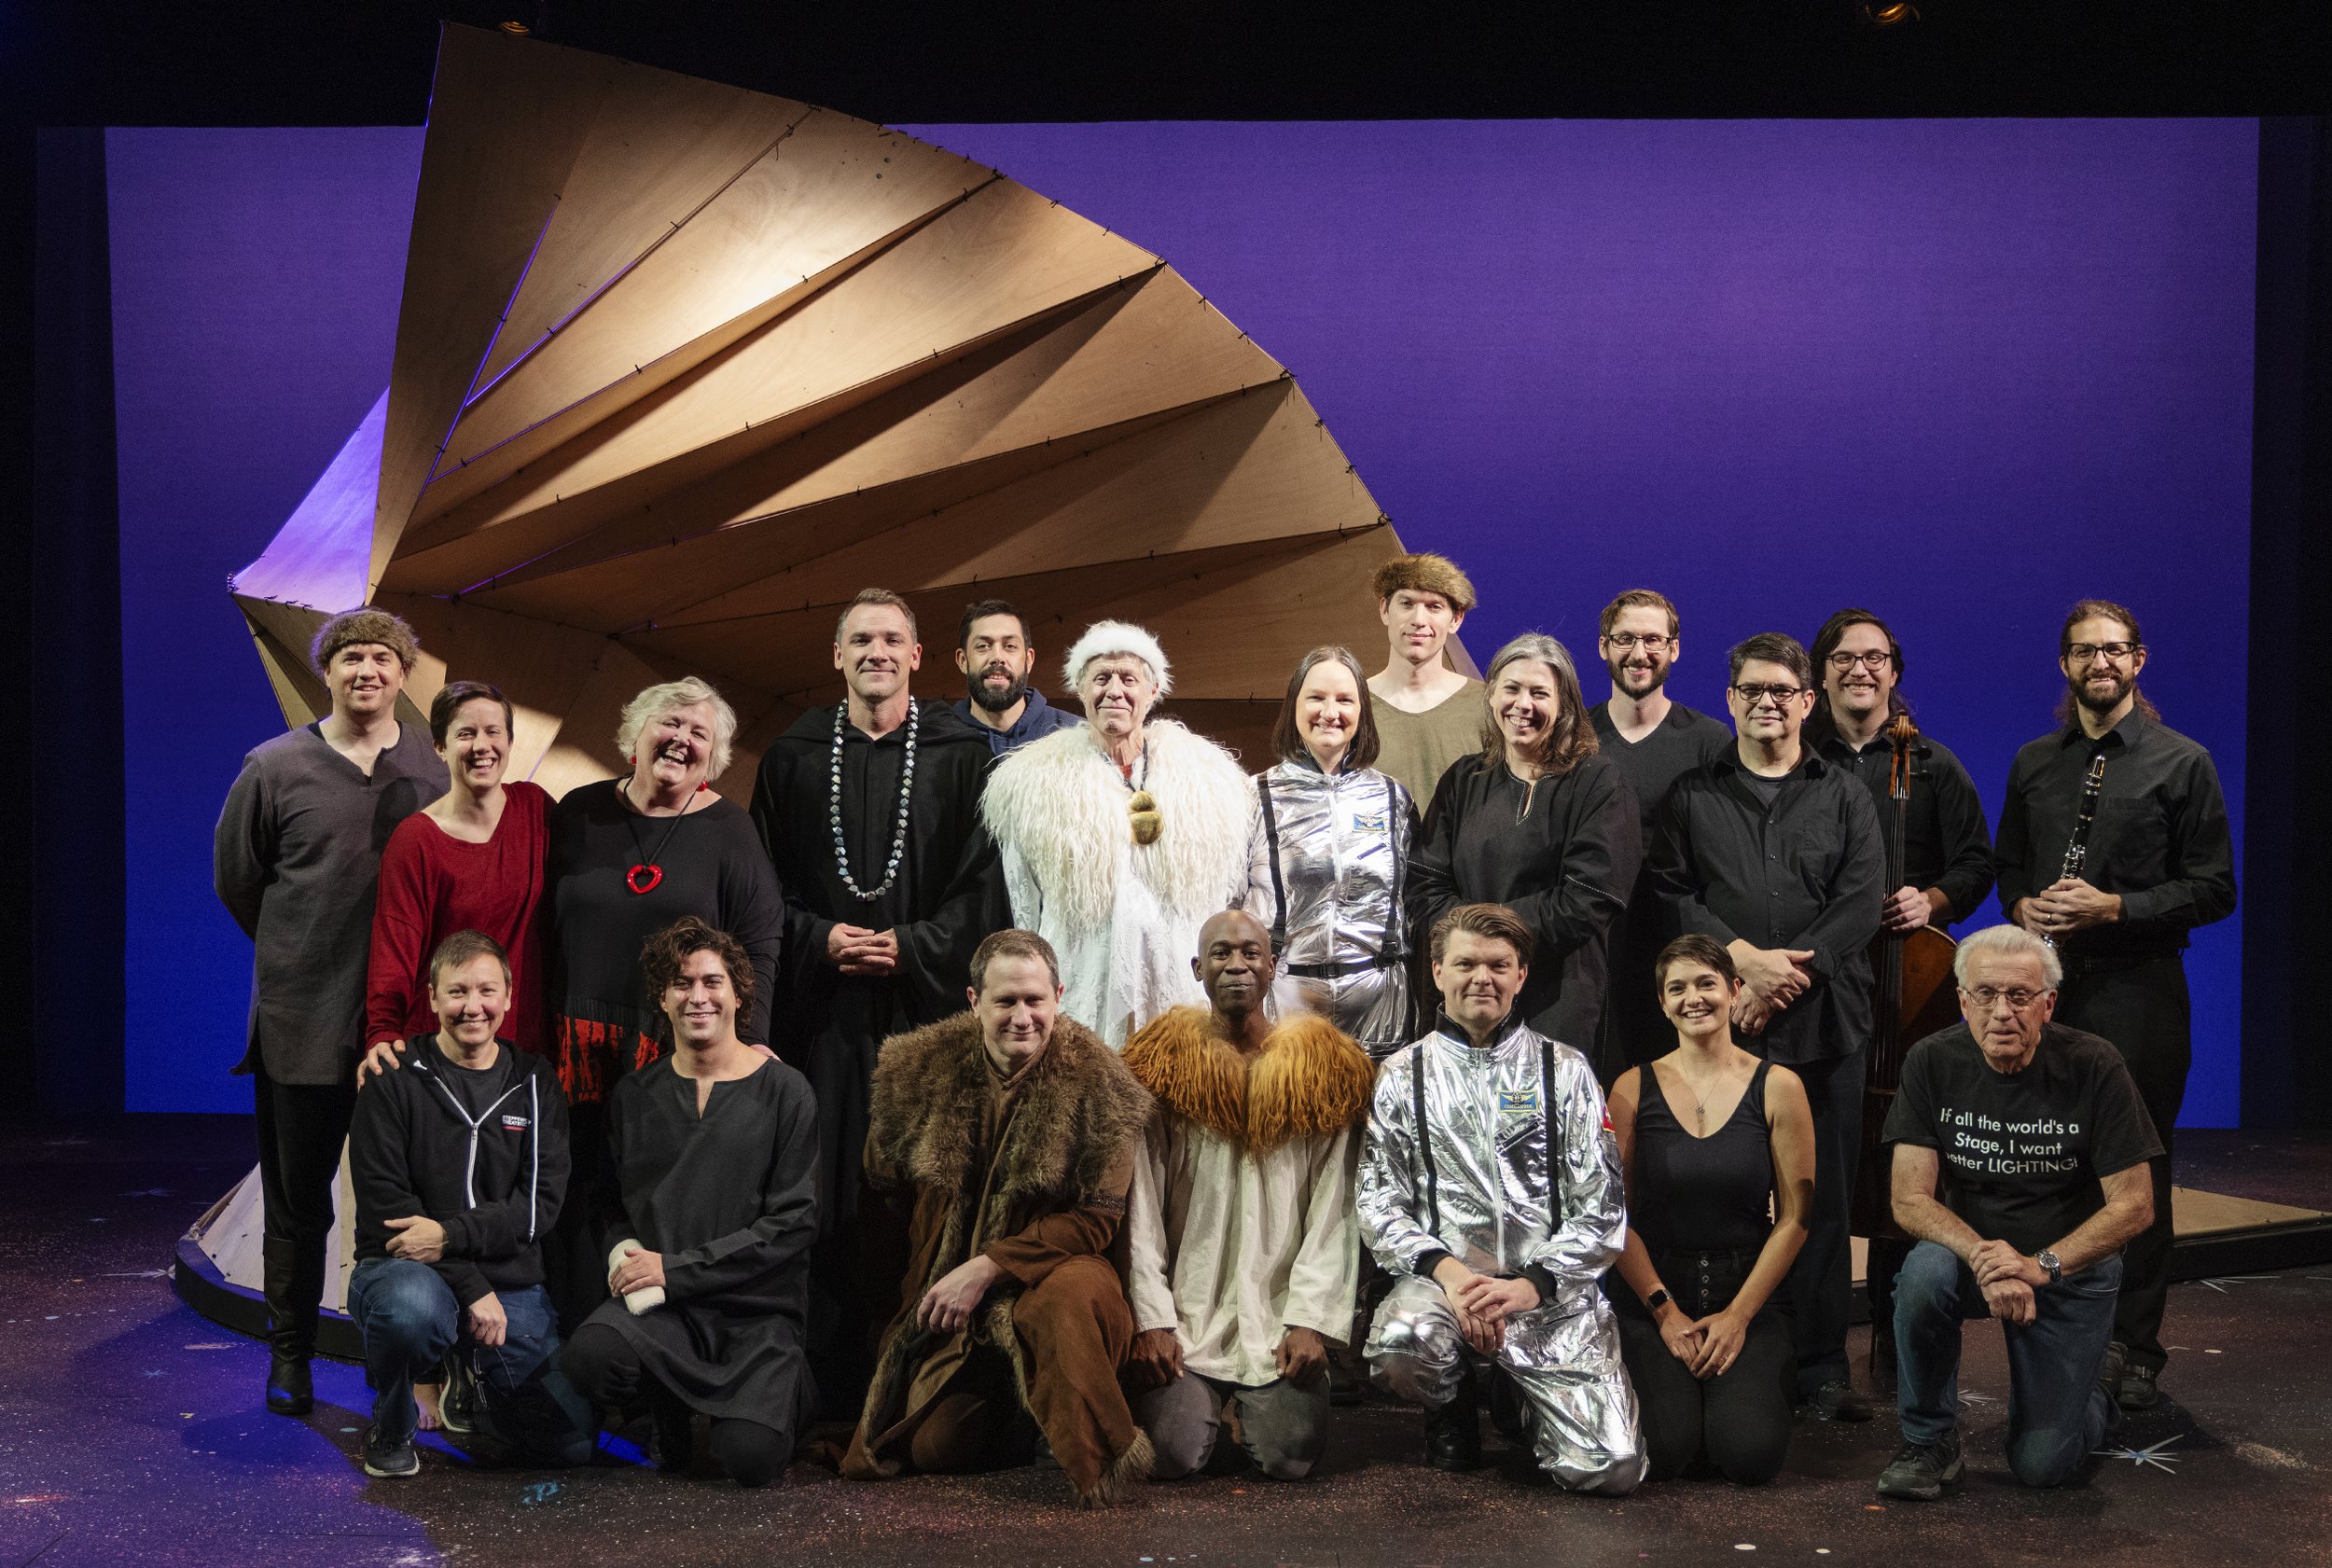 Cast, musicians, directors, adapter and crew of "The Left Hand of Darkness." Photo by Tim Fuller.